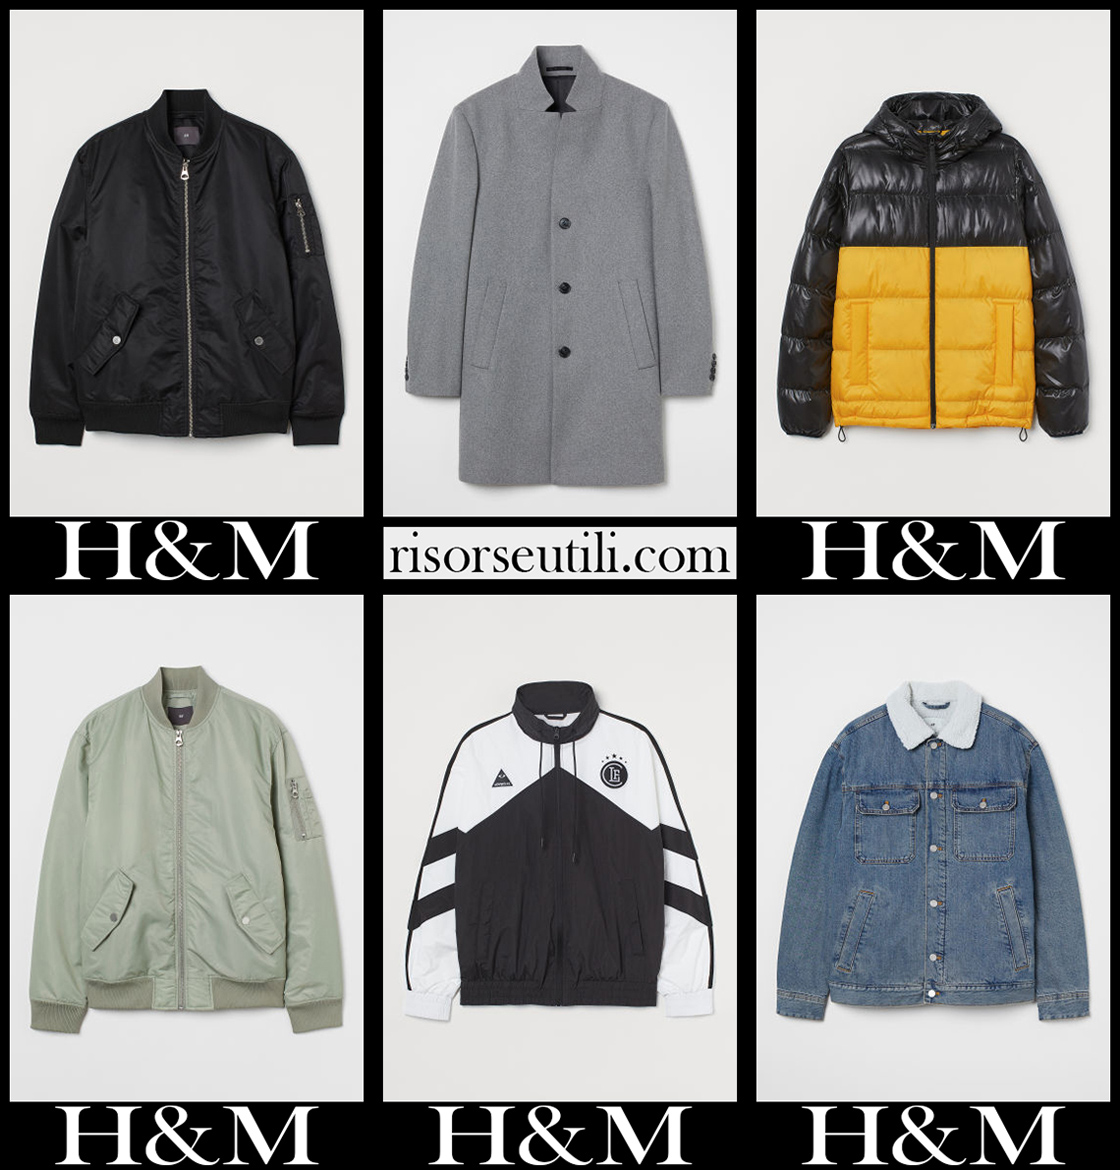 New arrivals HM jackets 2022 mens fashion clothing